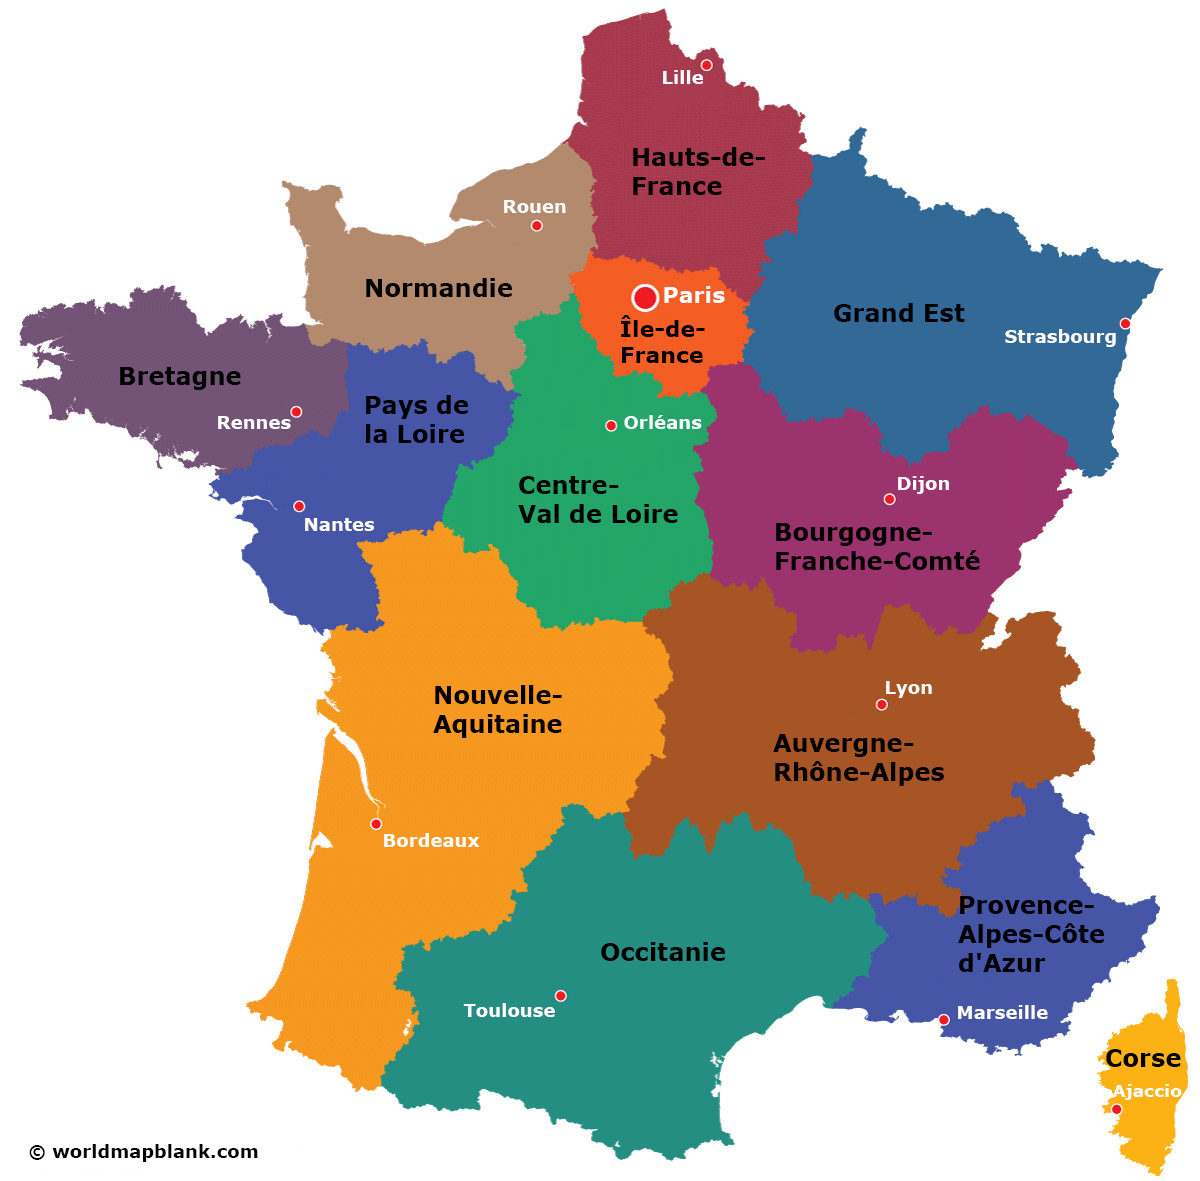 Map of France with Regions and Capitals